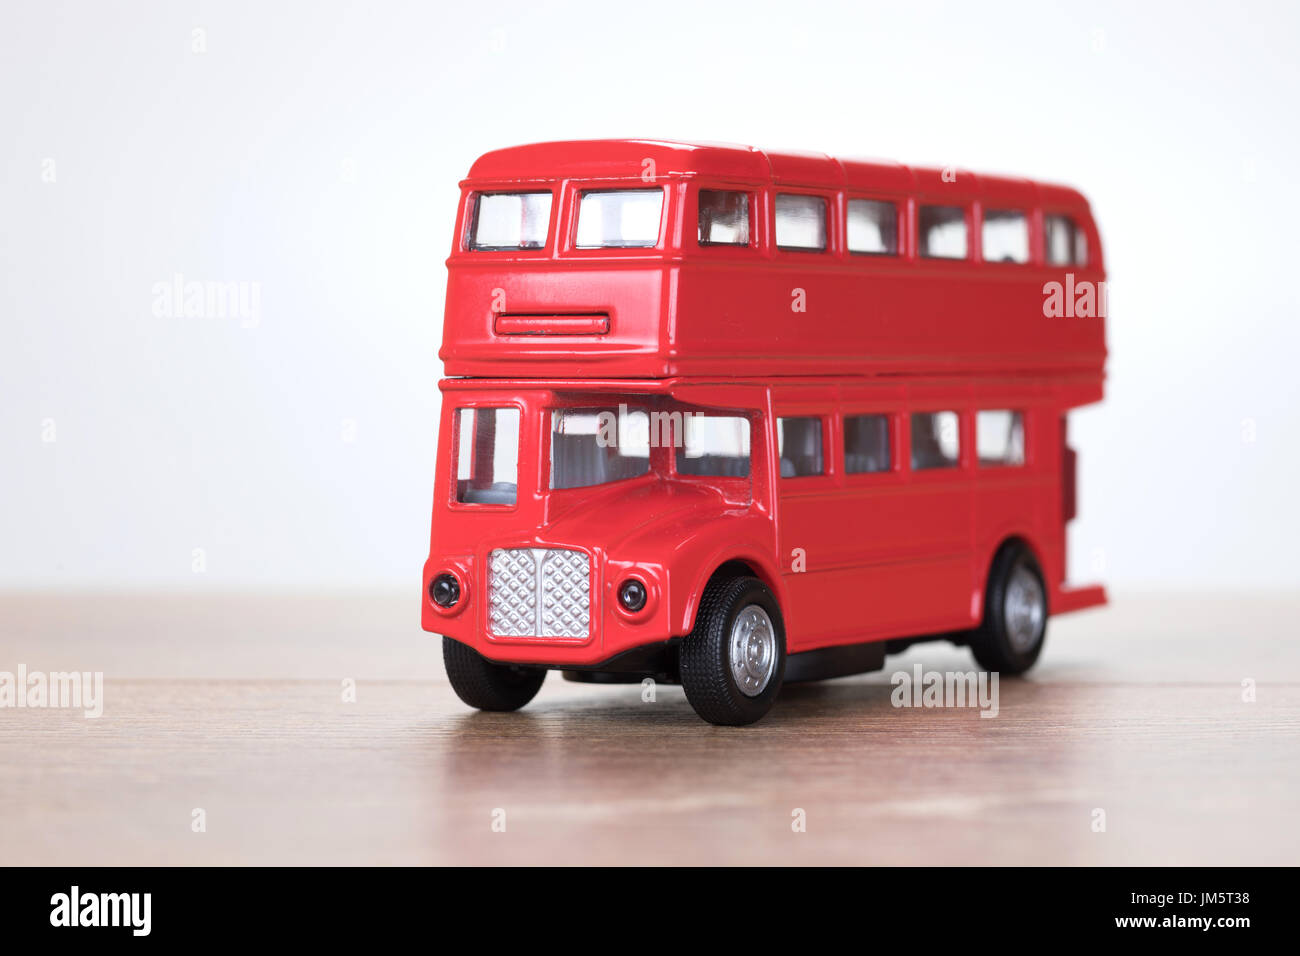 Close up view of a small scale model red London double decker bus toy on a  wooden table with copy space to the side Stock Photo - Alamy